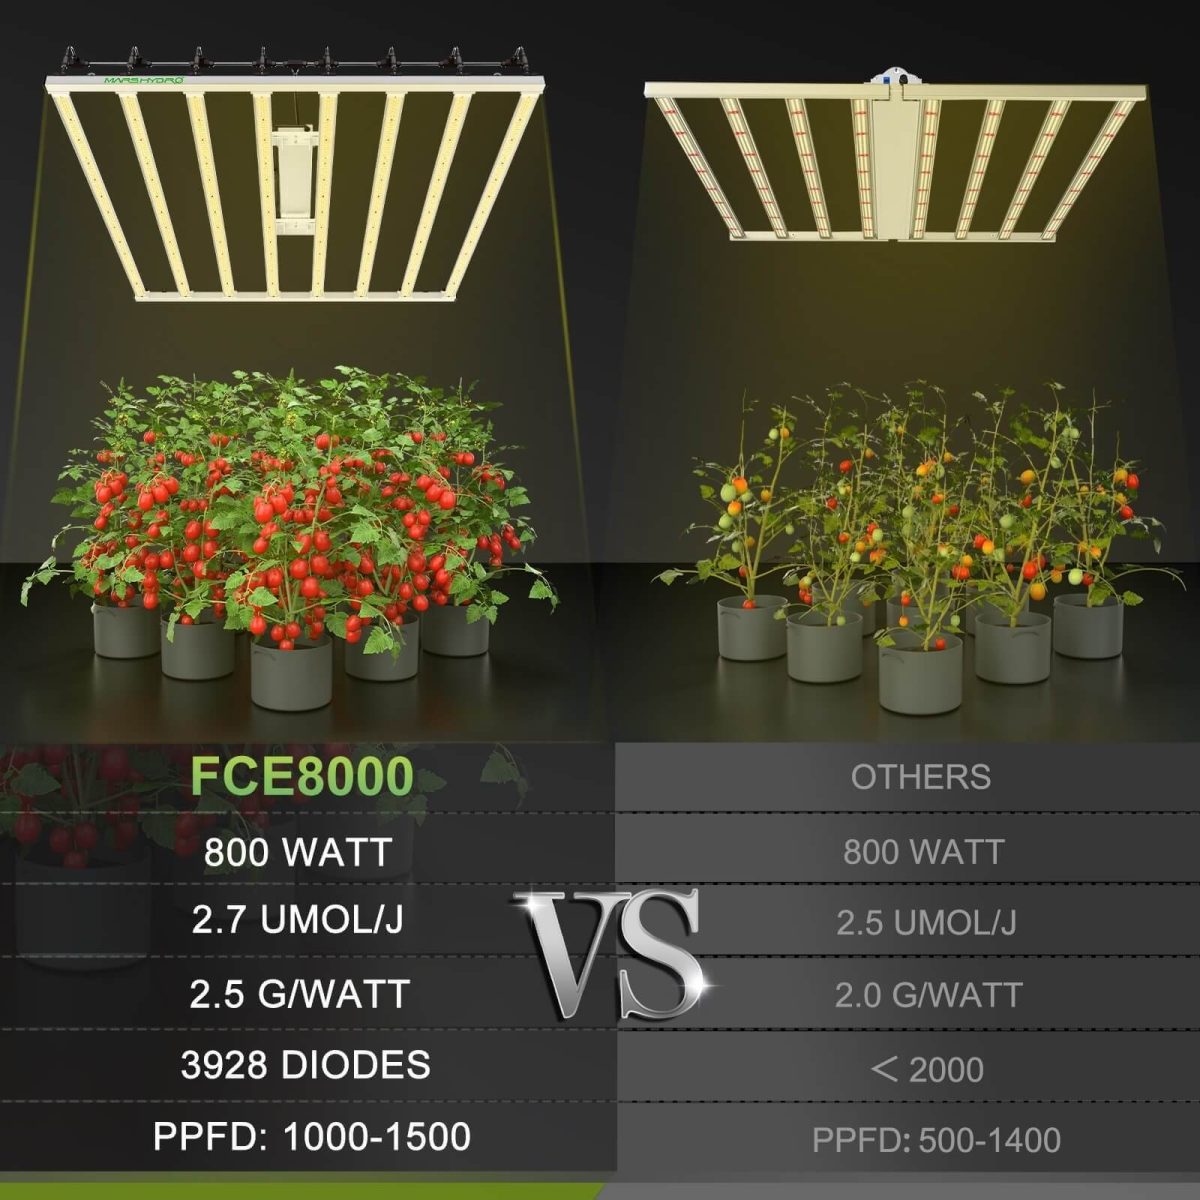 FC-E8000 led grow light is much better than other 800w lights in PPFD, diode brand, PPE, max yield.